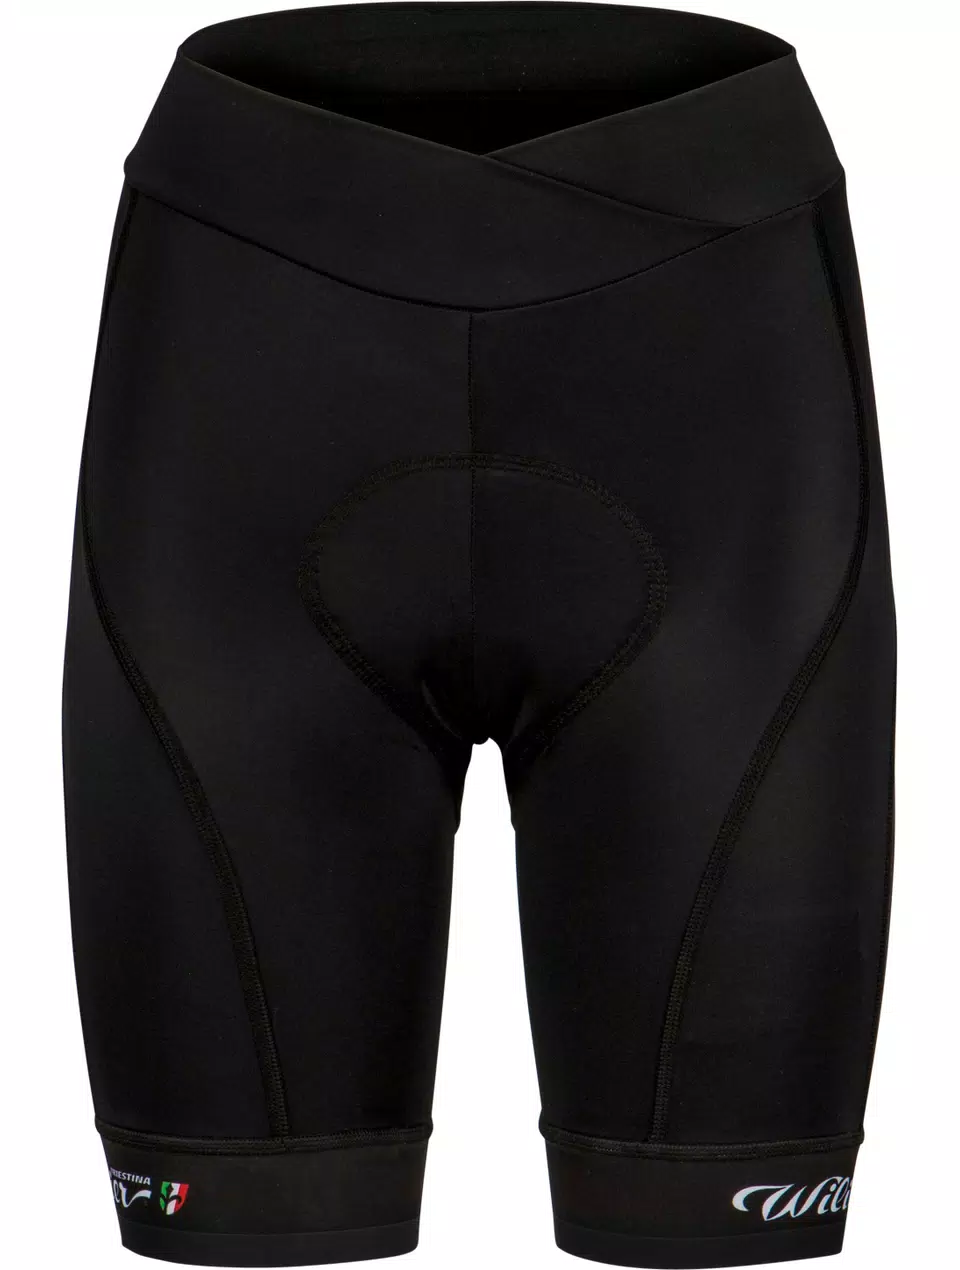 Pantaloncino Wilier Cycling Club donna